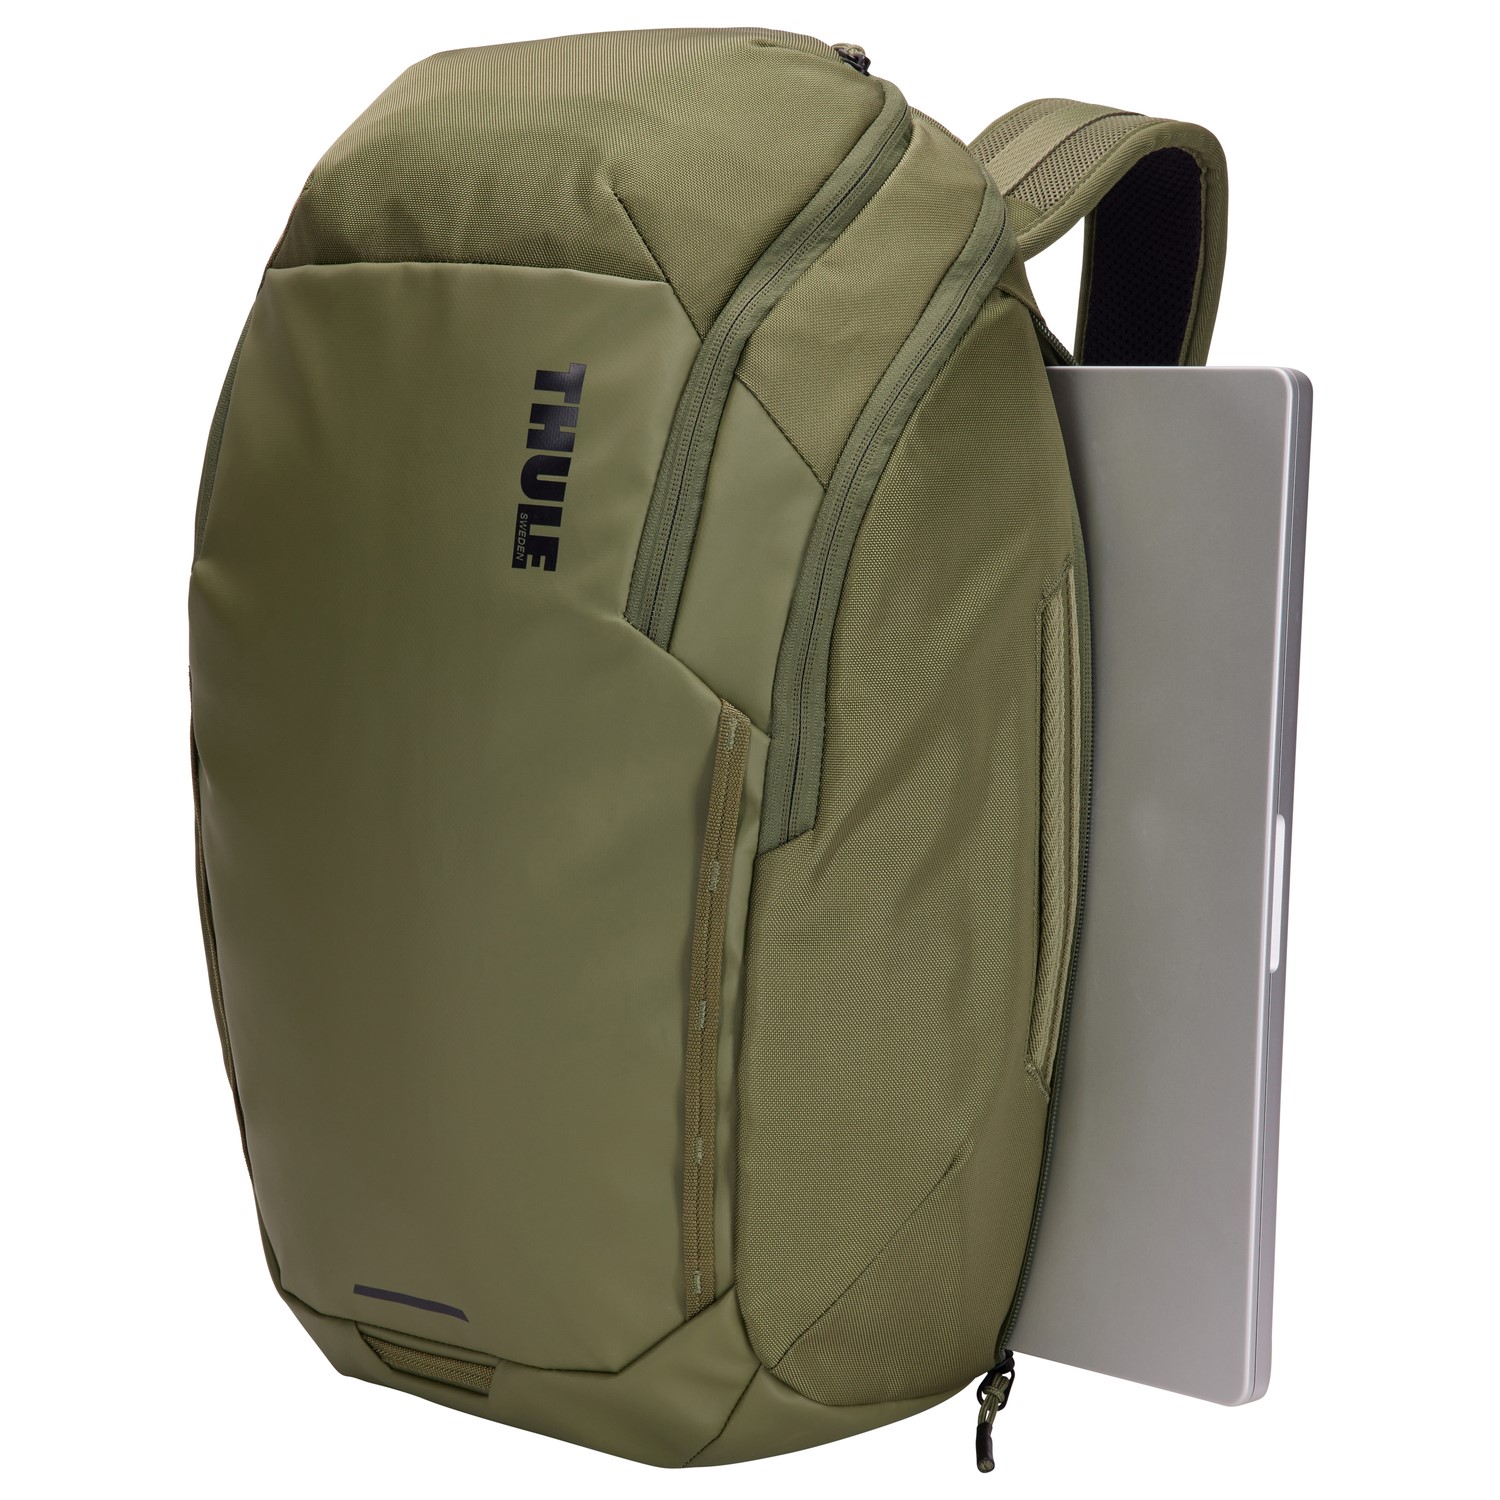 Quickly access your laptop on the go with the side zip